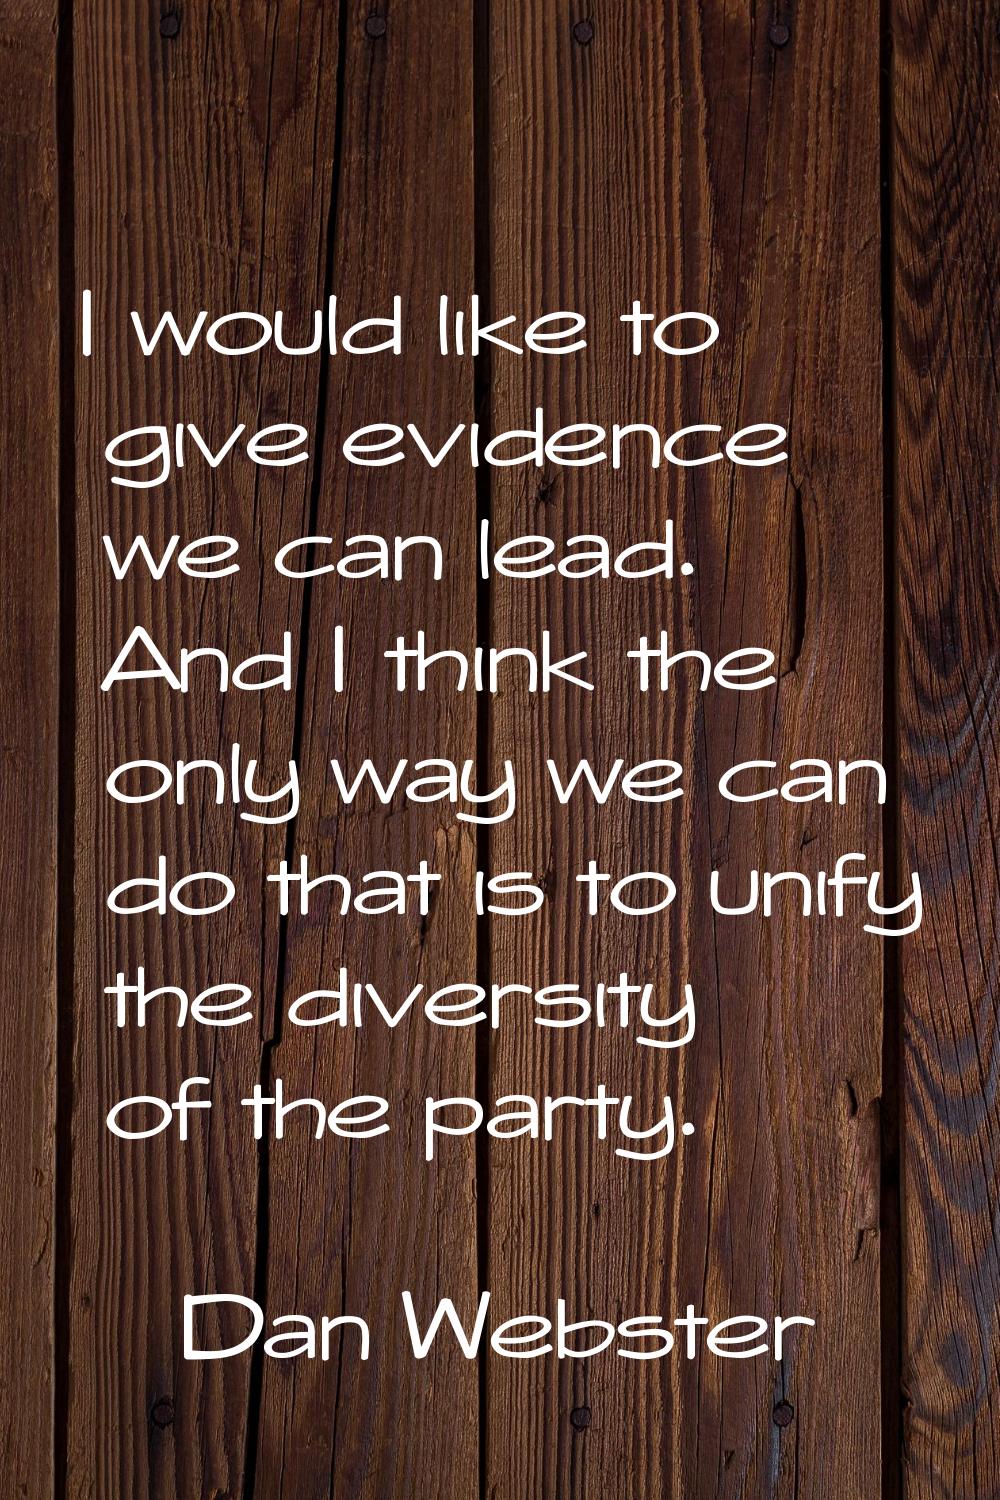 I would like to give evidence we can lead. And I think the only way we can do that is to unify the 